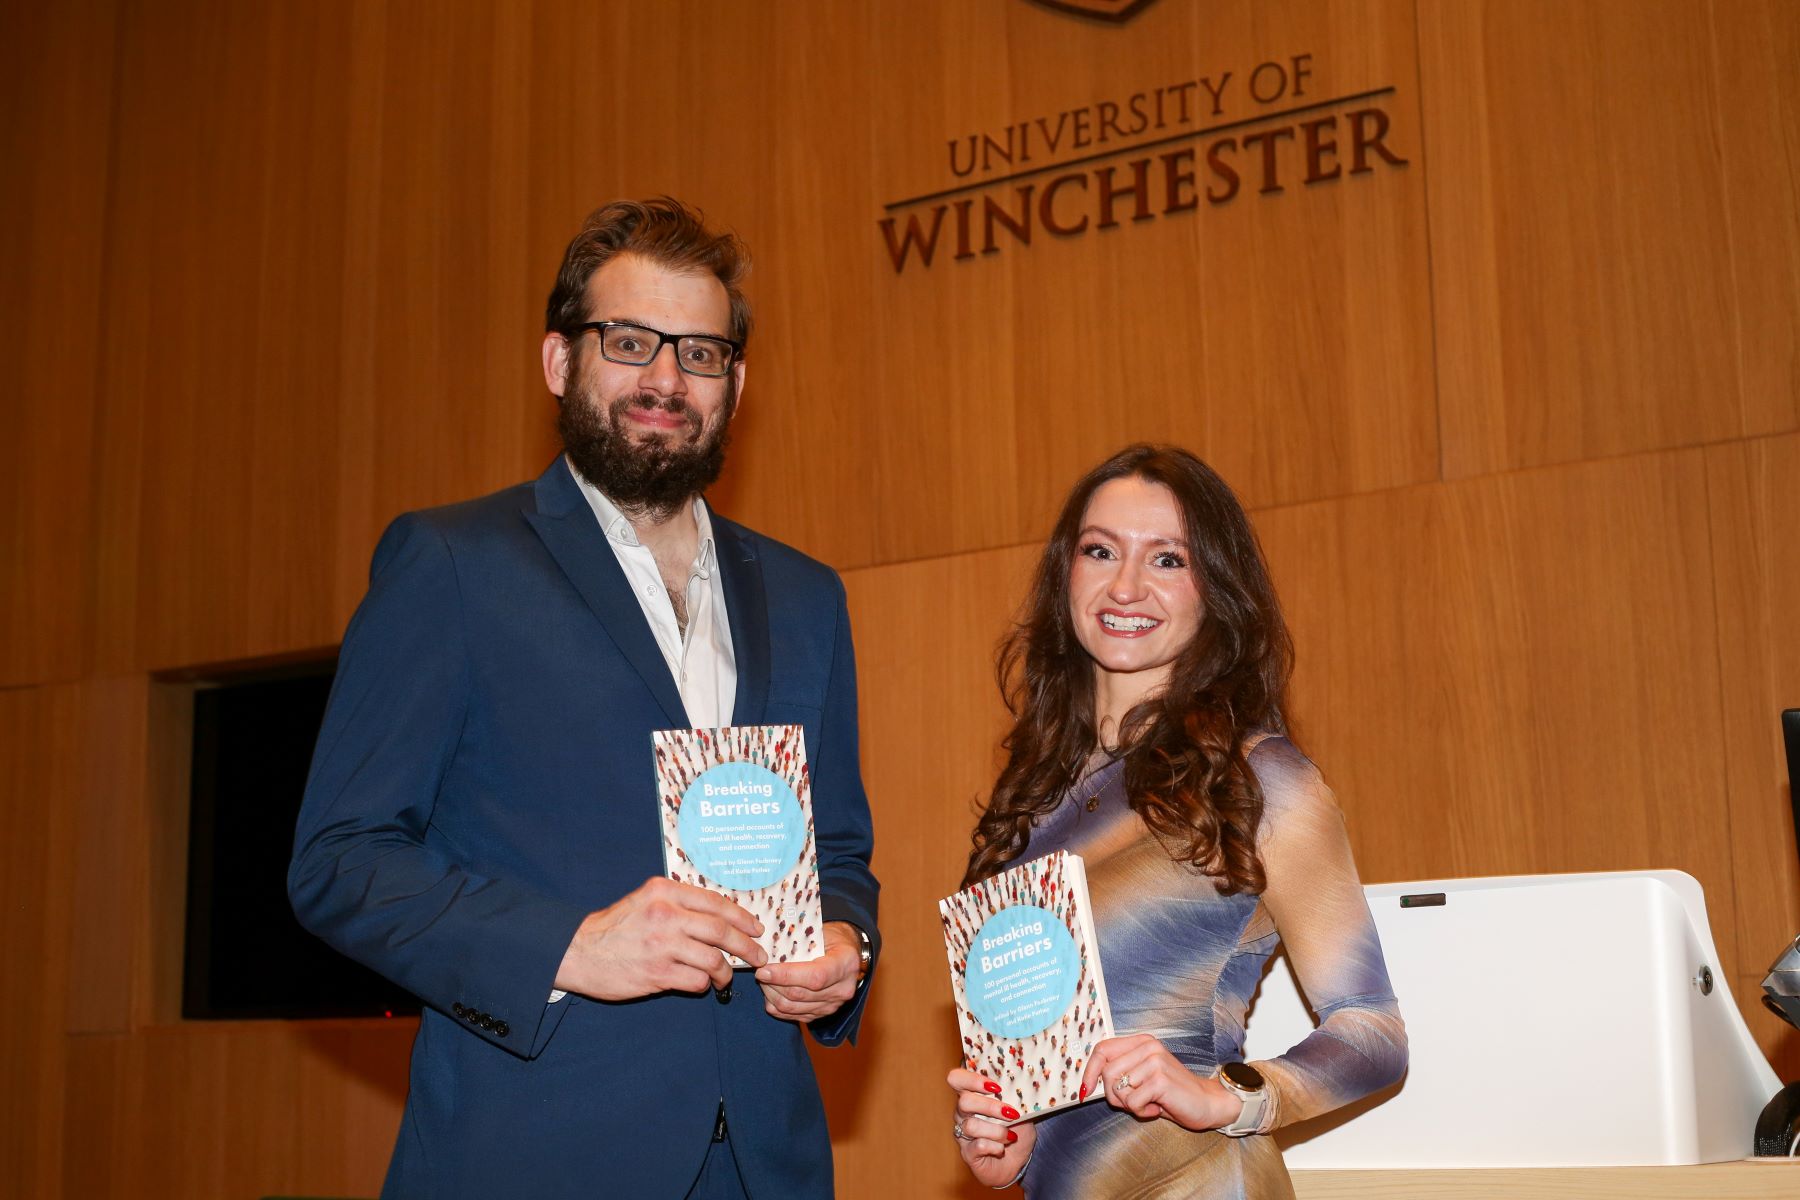 A bearded man and young woman holding up books